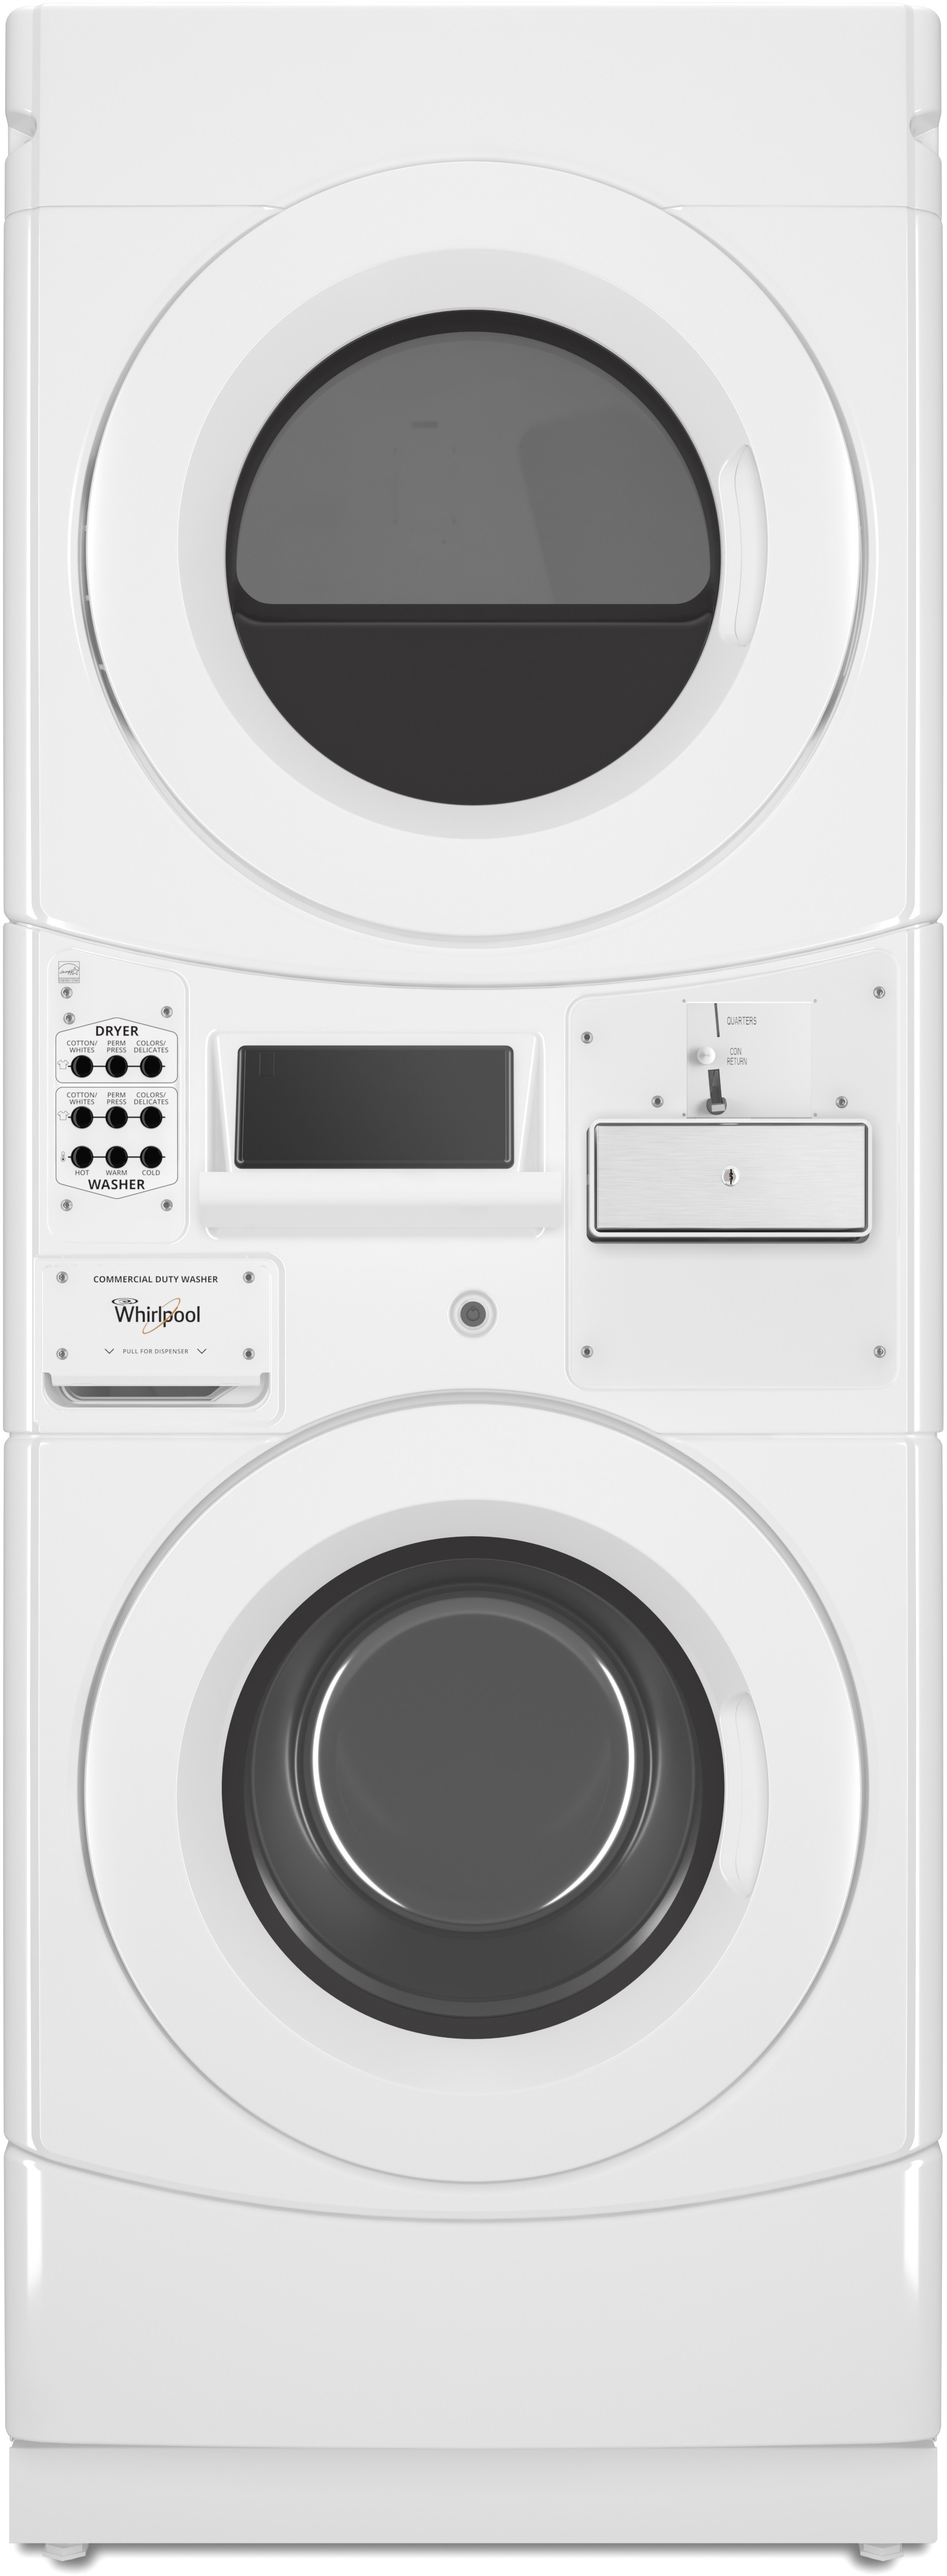 Commercial Laundry 27"" GasLaundry Center - Whirlpool CGT9000GQ